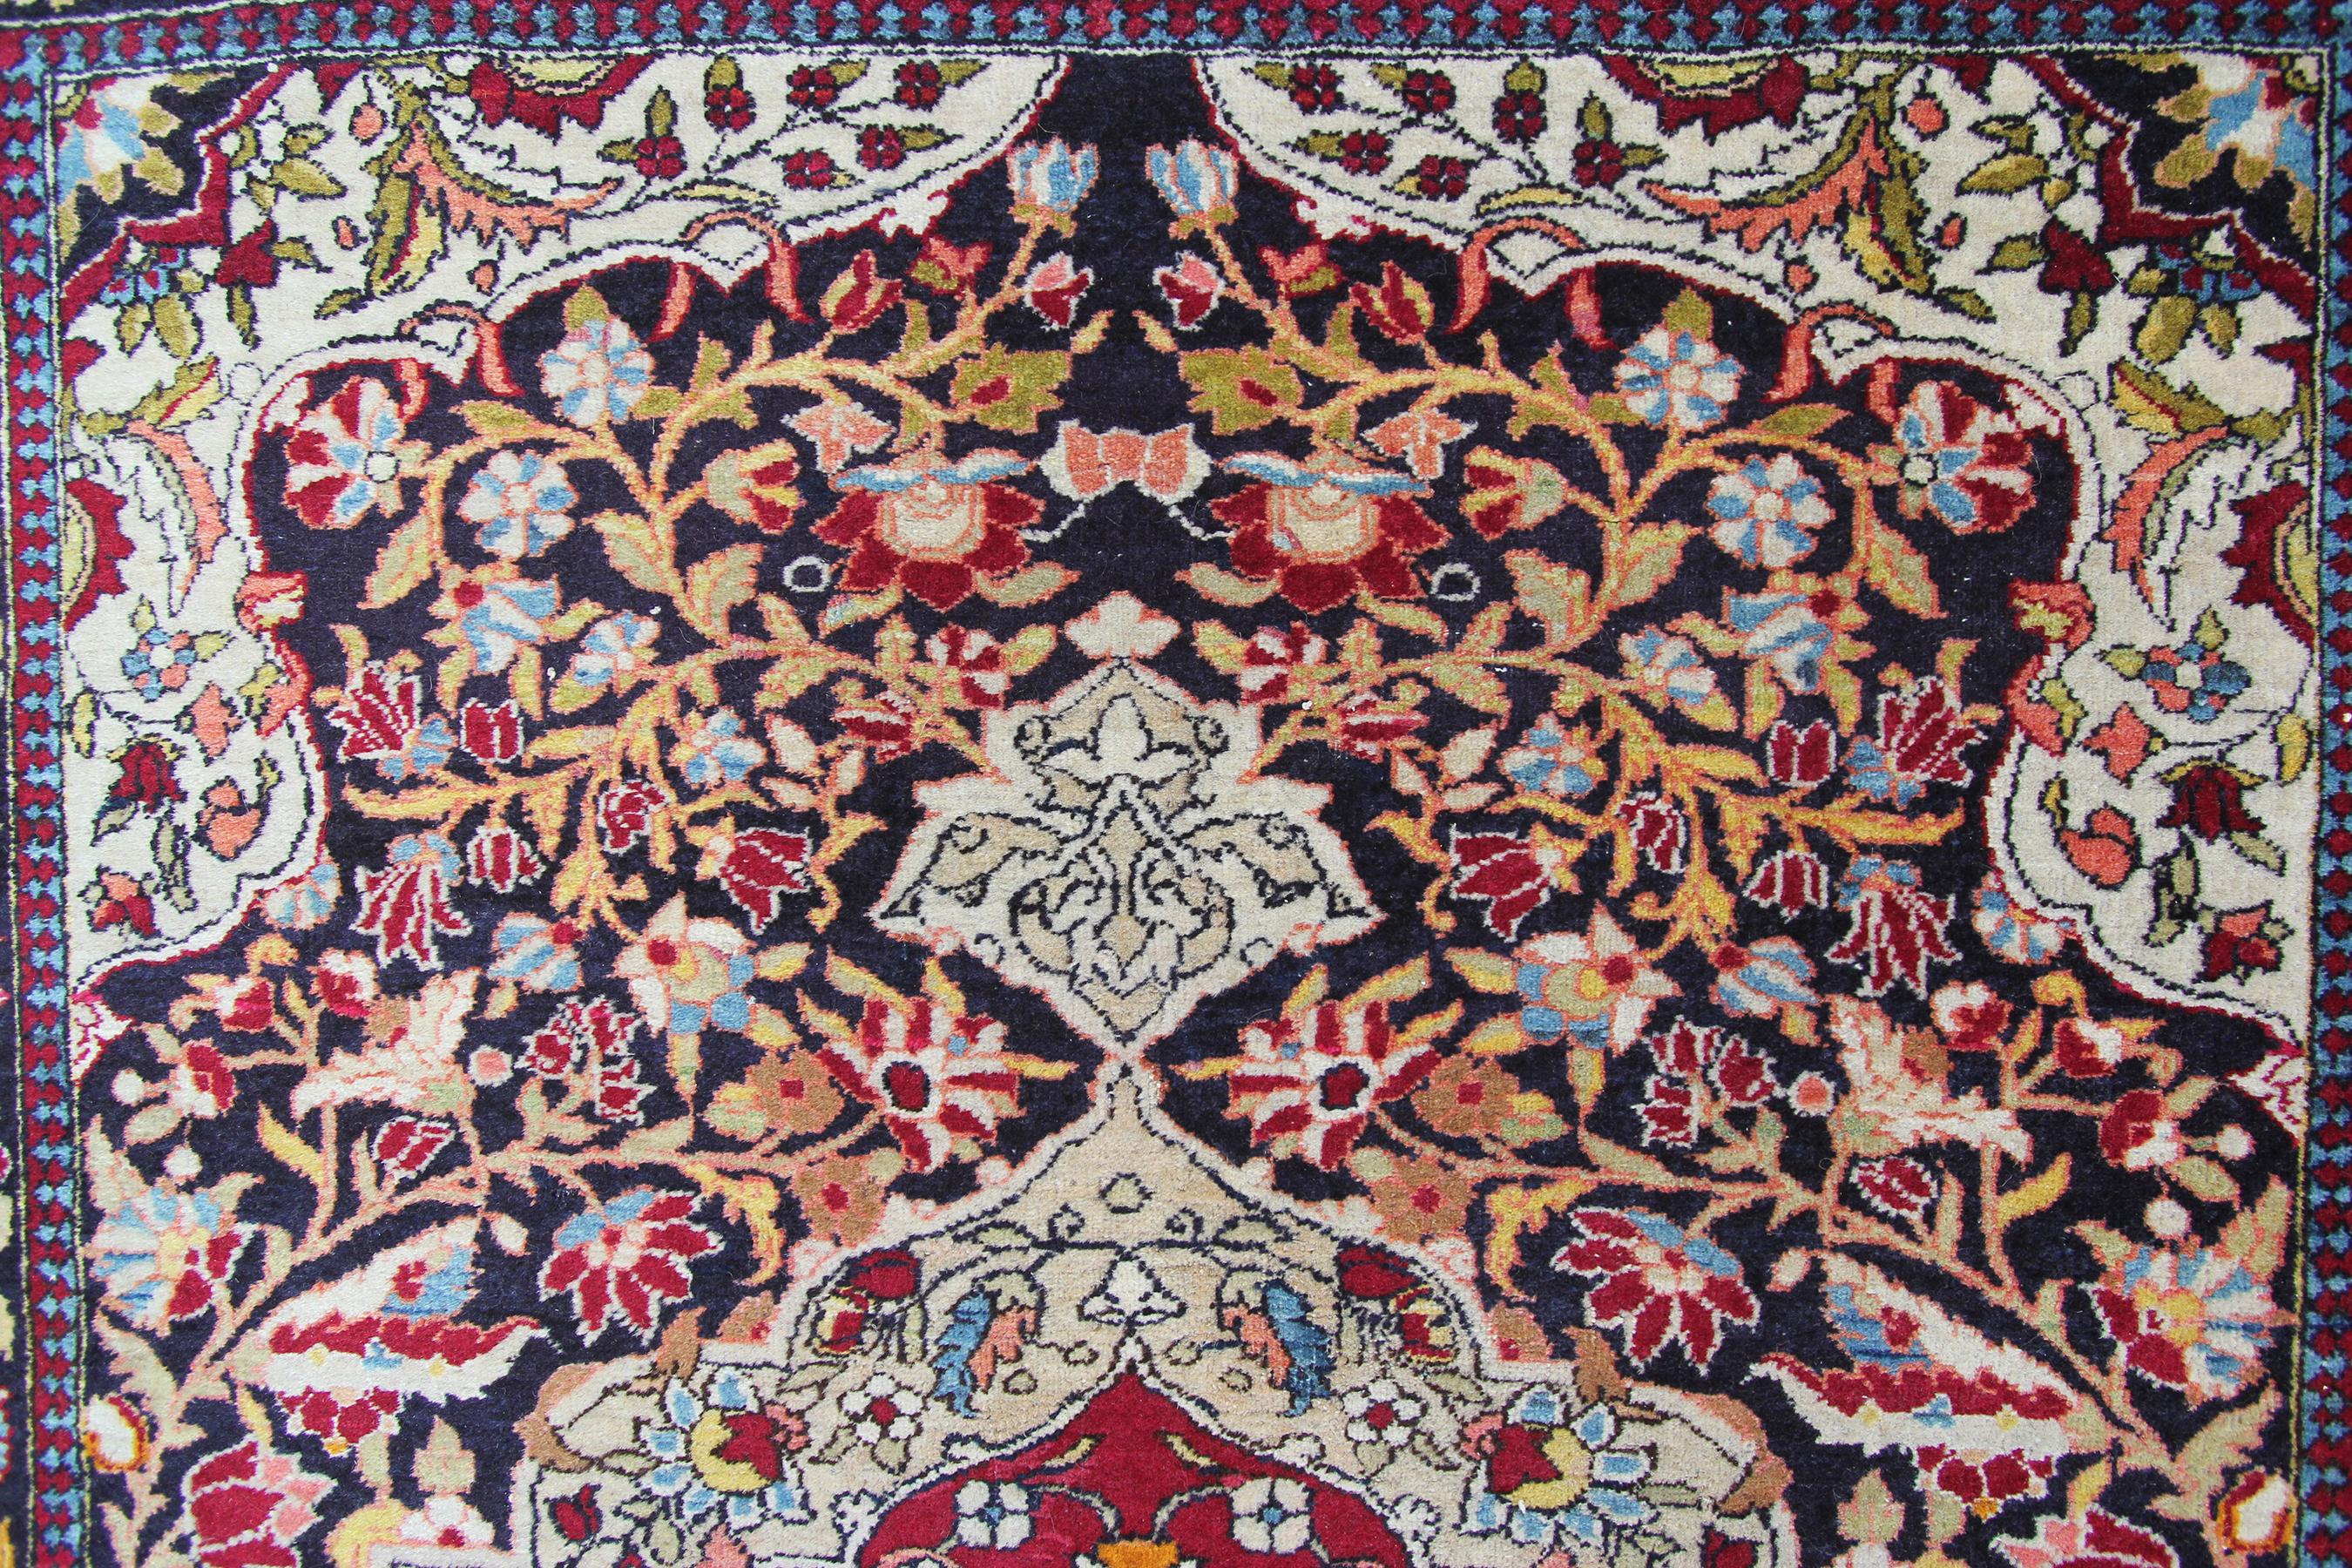 Late 20th Century Black High Quality Antique Persian Isfahan Rug Artisan Work 4x5 107x153cm For Sale